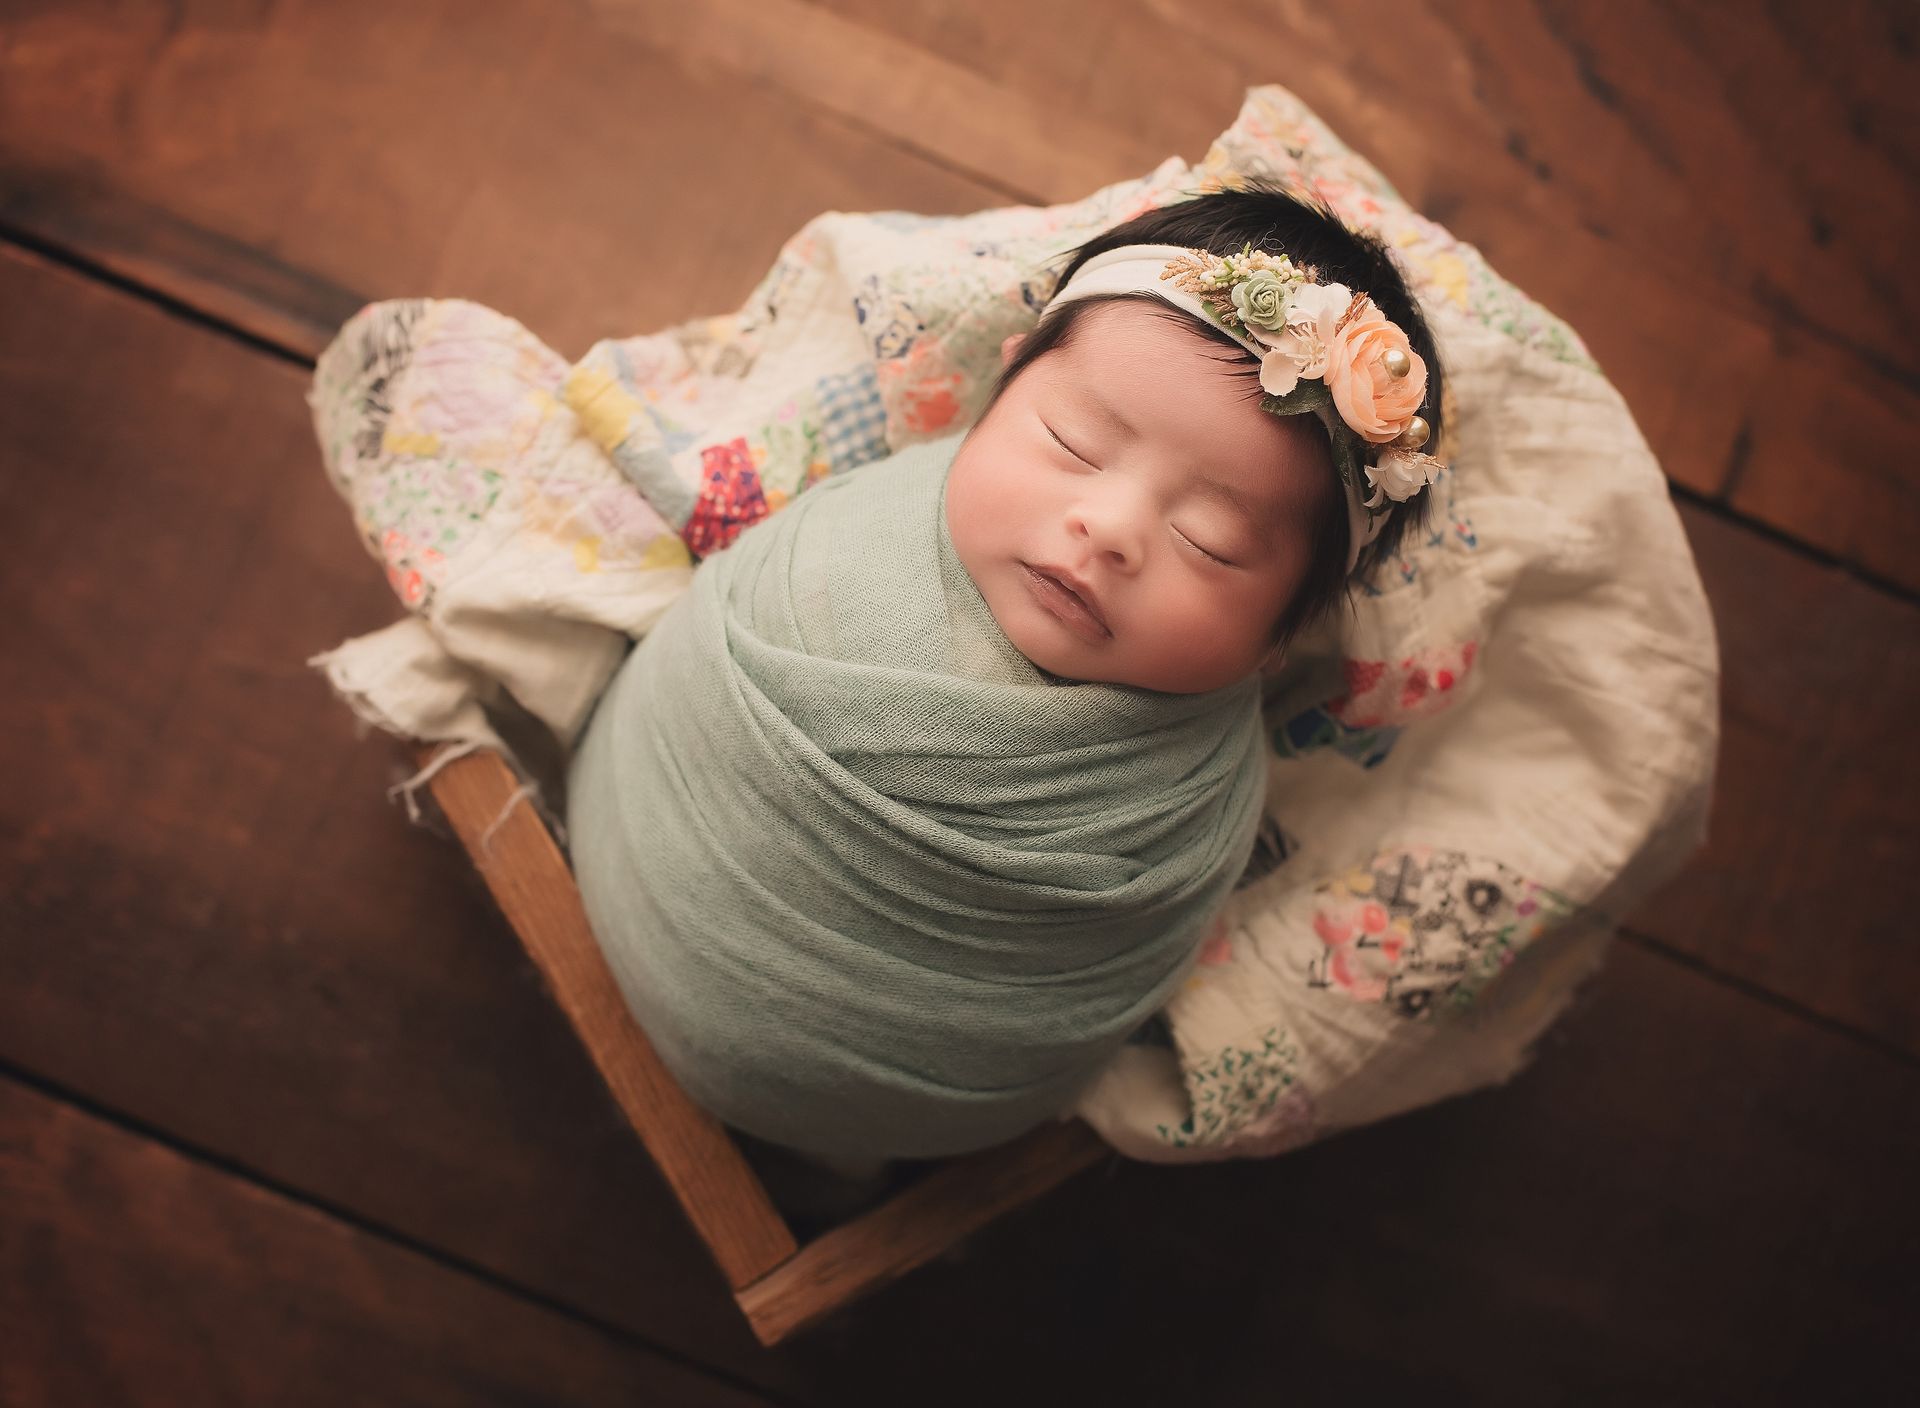 A newborn baby is wrapped in a blanket and wearing a flower headband.